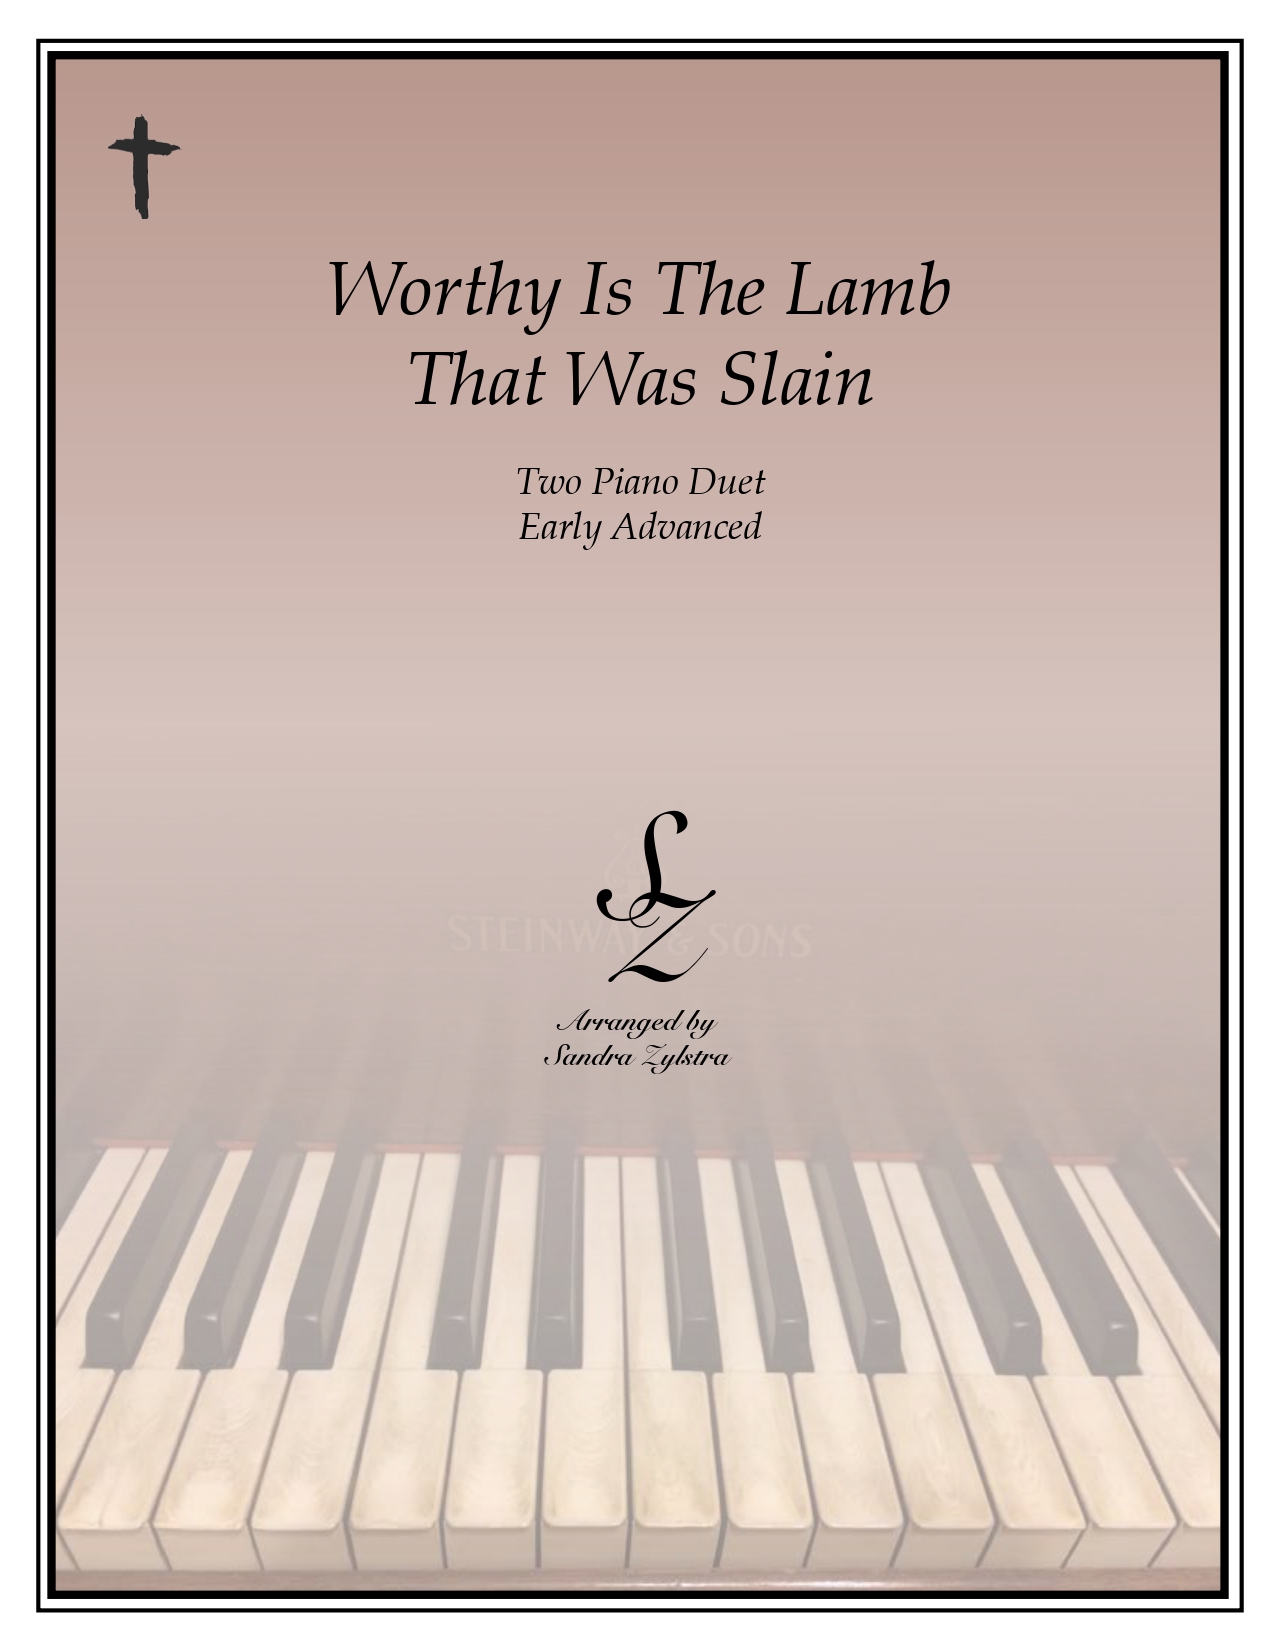 Worthy Is The Lamb That Was Slain Duet cover page 00011